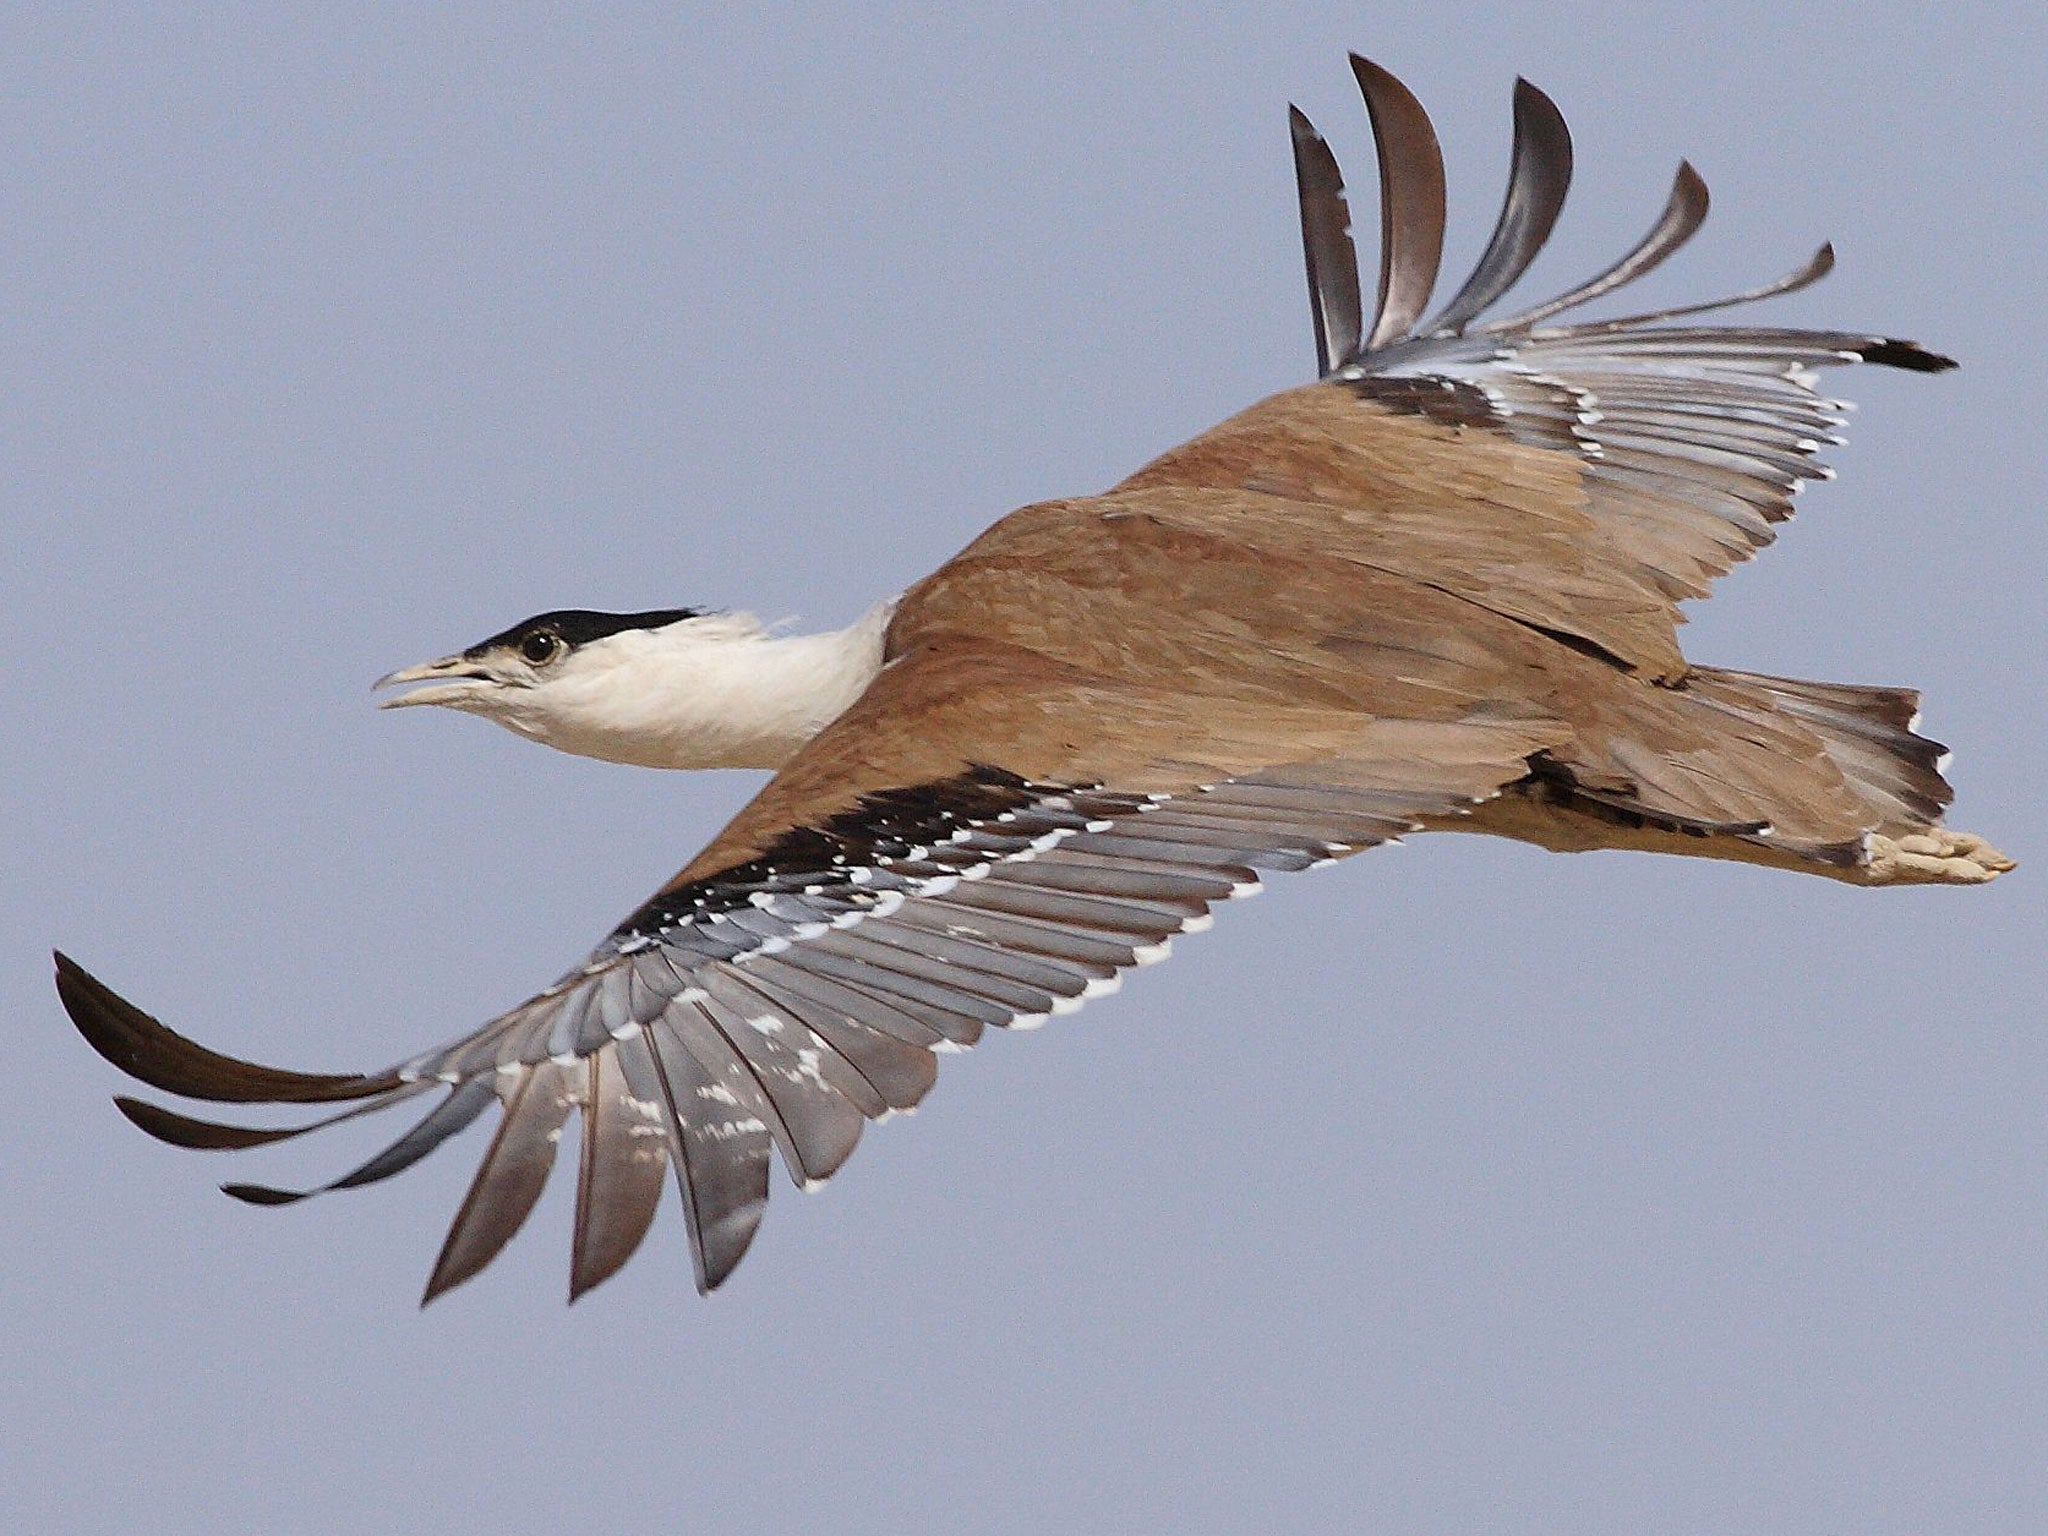 Conservationists hope to save the Great Indian Bustard from extinction